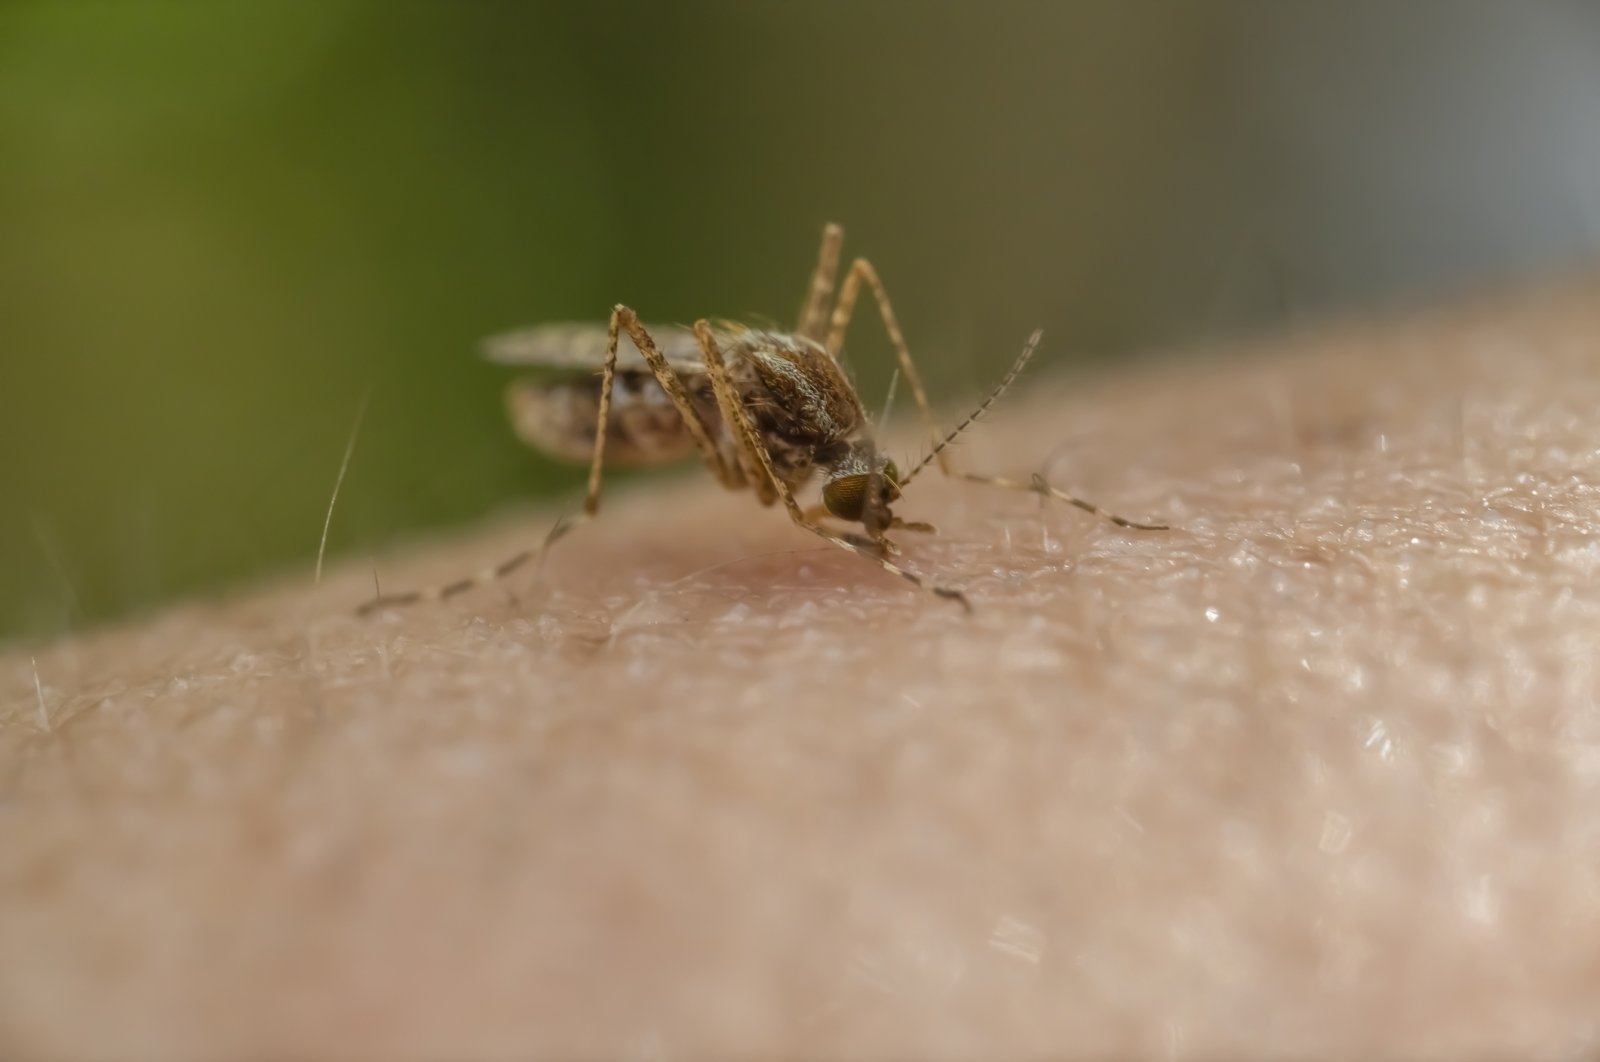 Malaria is transmitted through the bite of female Anopheles mosquitoes infected with the parasite. (Getty Images)